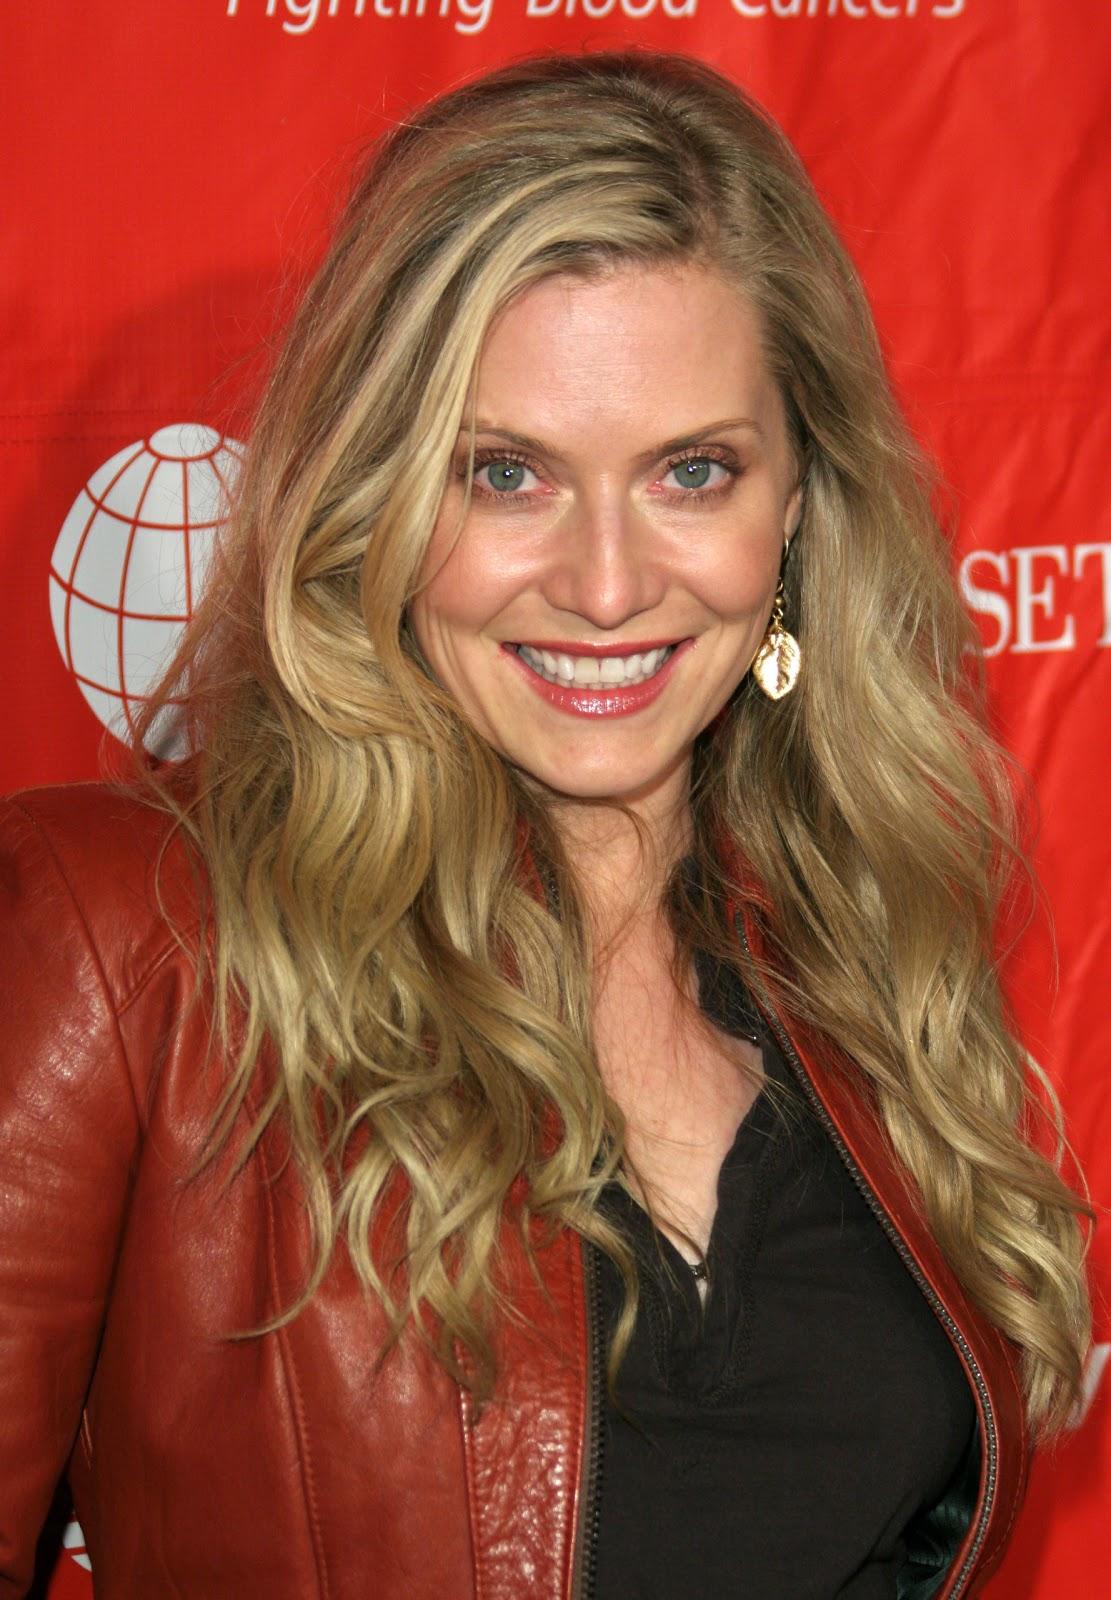 65+ Hot Pictures Of Emily Procter Will Make You Stare The Monitor For Hours | Best Of Comic Books